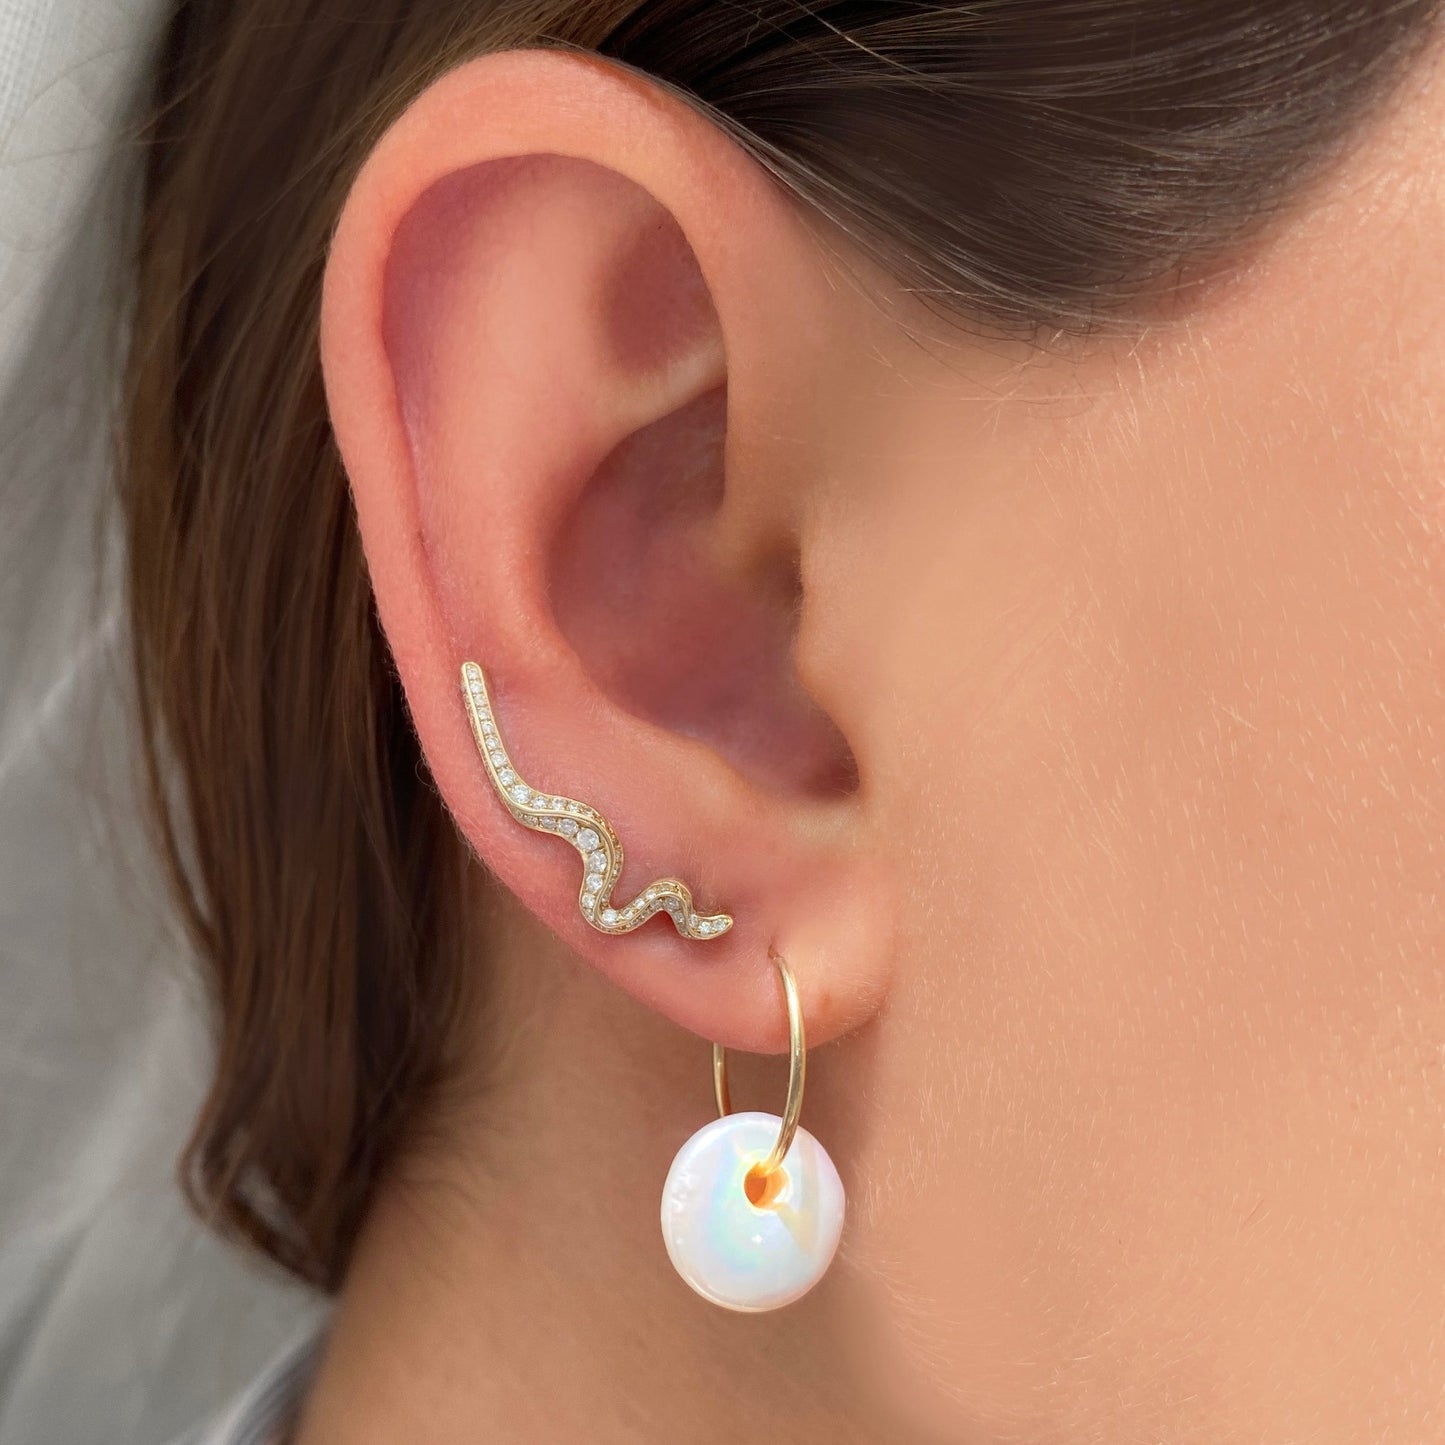 14k gold Full Pave Large Ripple Climber Earrings styled on a ear with a coin pearl hoop